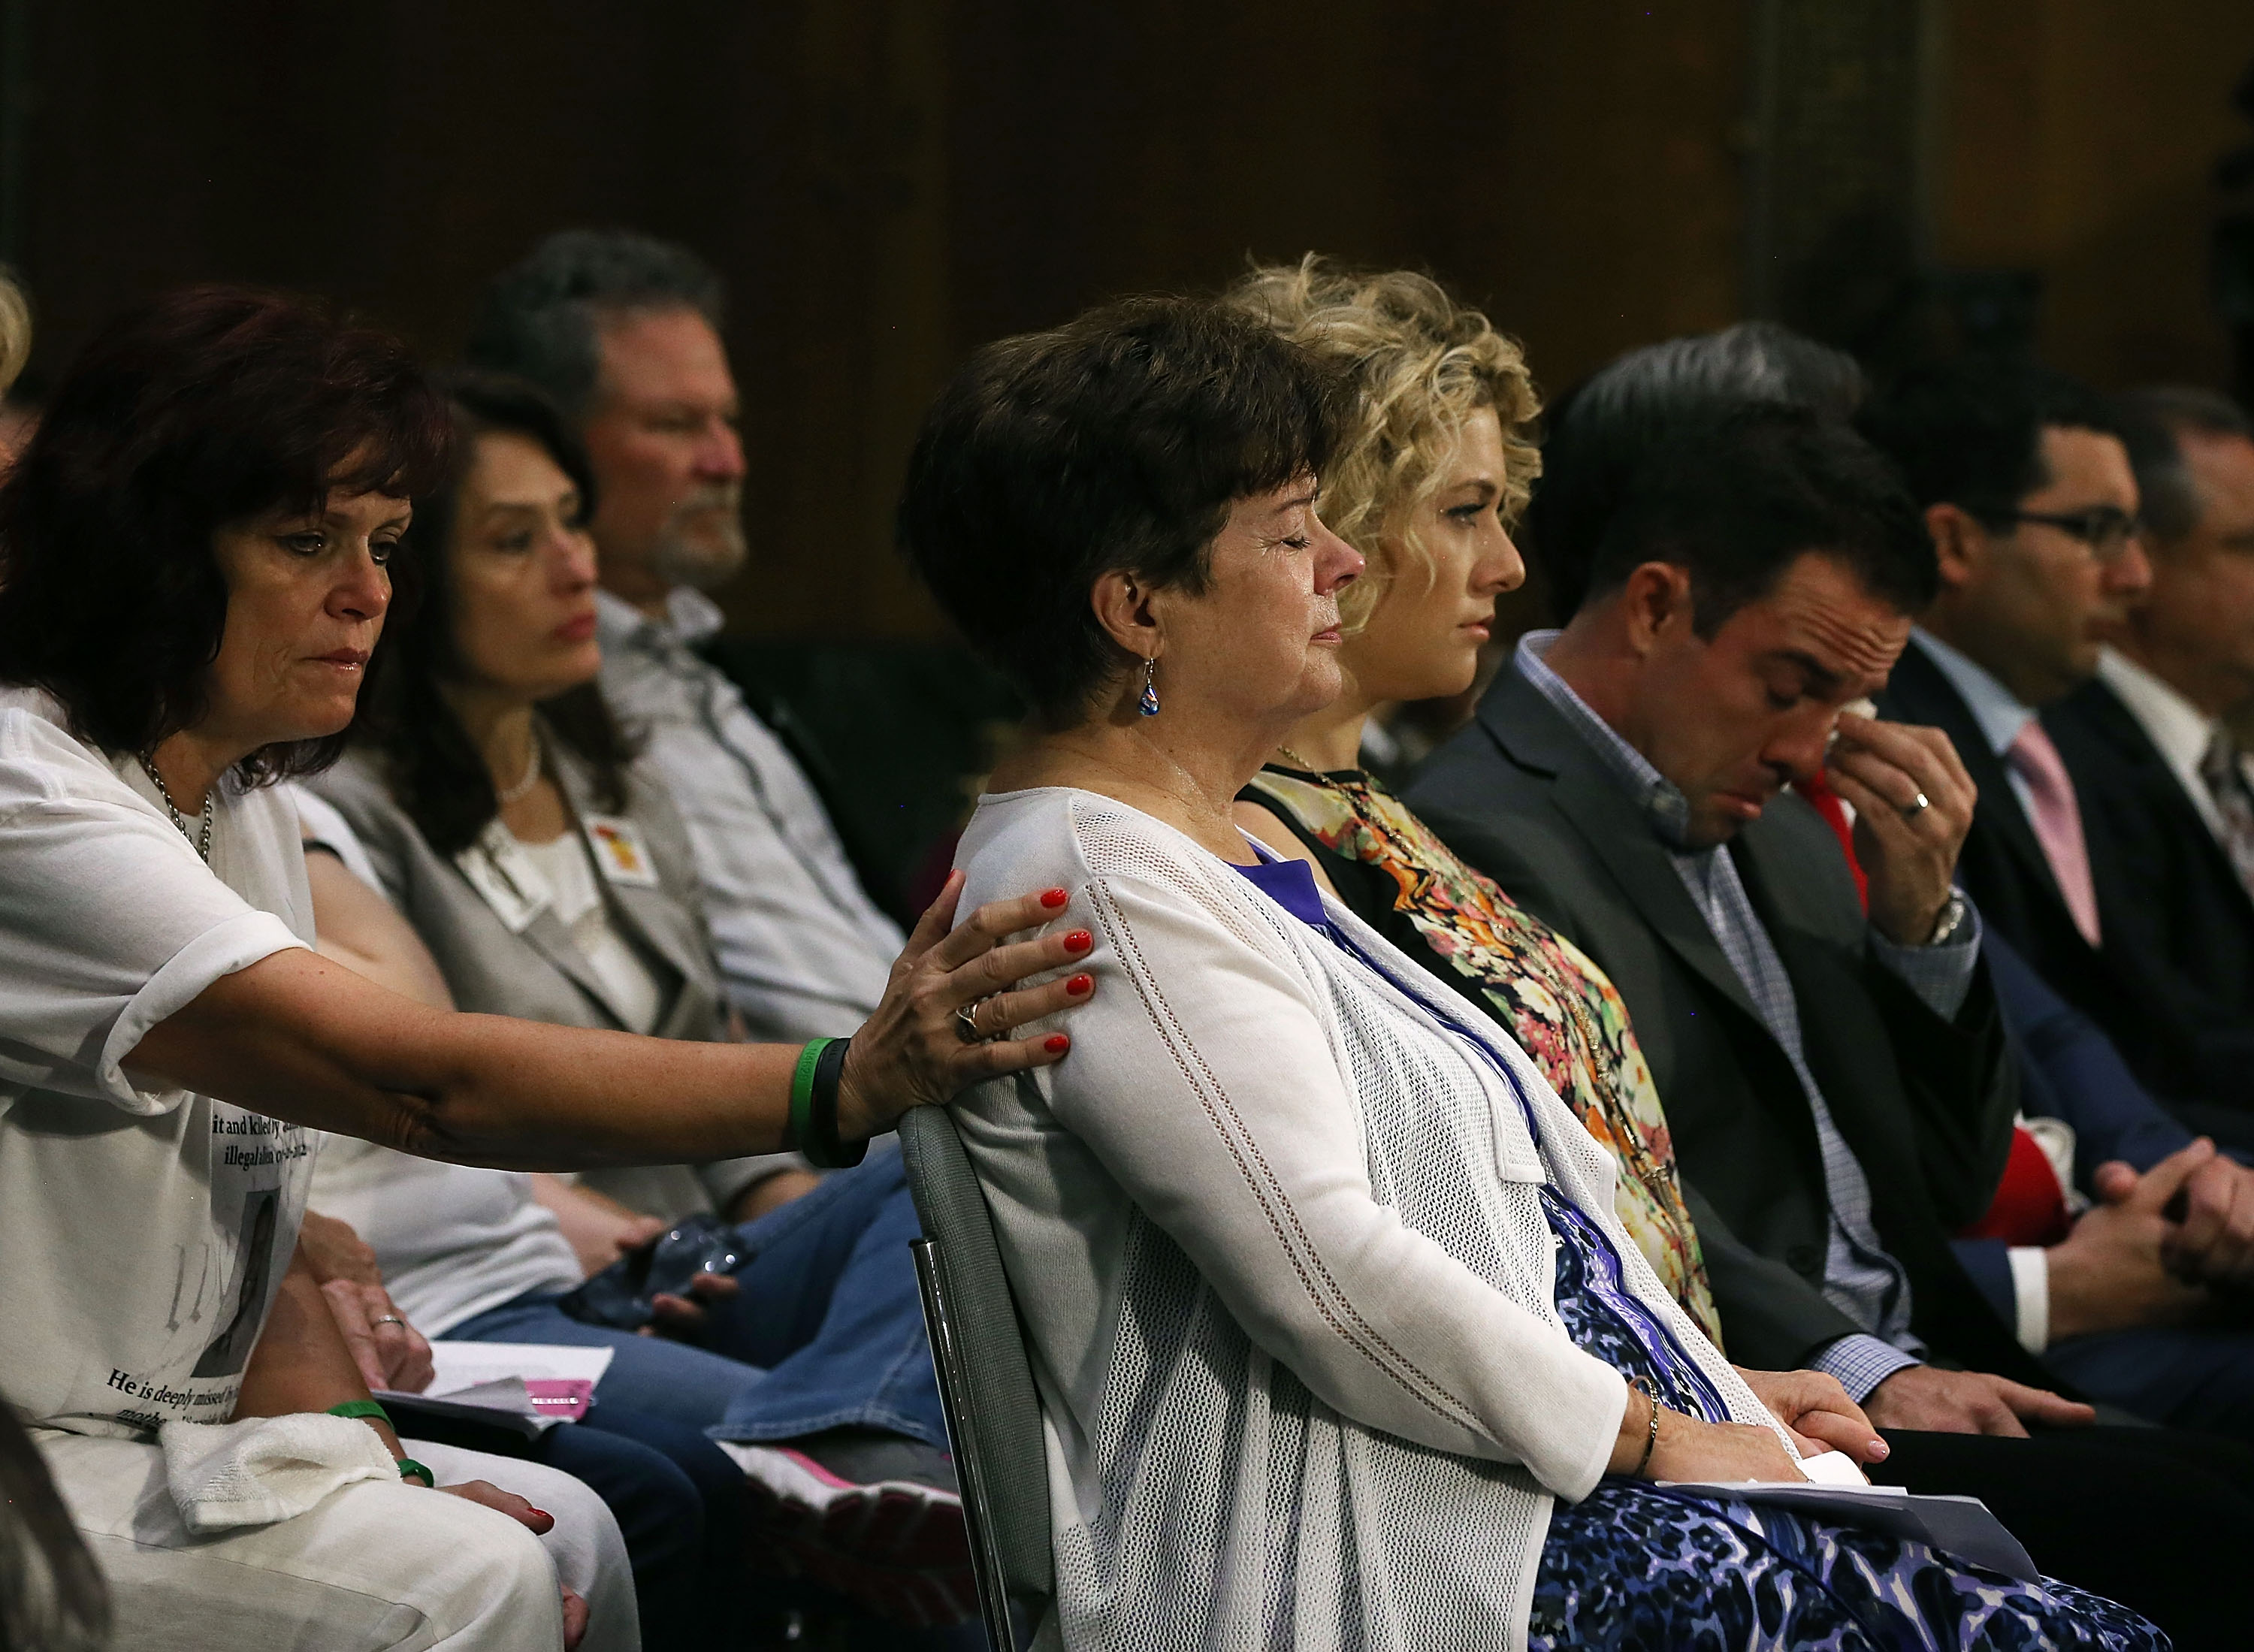 Liz Sullivan (C) mother of Kathryn "Kate" Steinle who was killed by an illegal immigrant in San Francisco, is comforted while her son Brad Steinle (R) sits nearby during a Senate Judiciary Committee hearing on Capitol Hill, July 21, 2015 in Washington, DC. The committee heard testimony from family members who have had loved ones killed by illegal immigrants. (Mark Wilson&mdash;Getty Images)